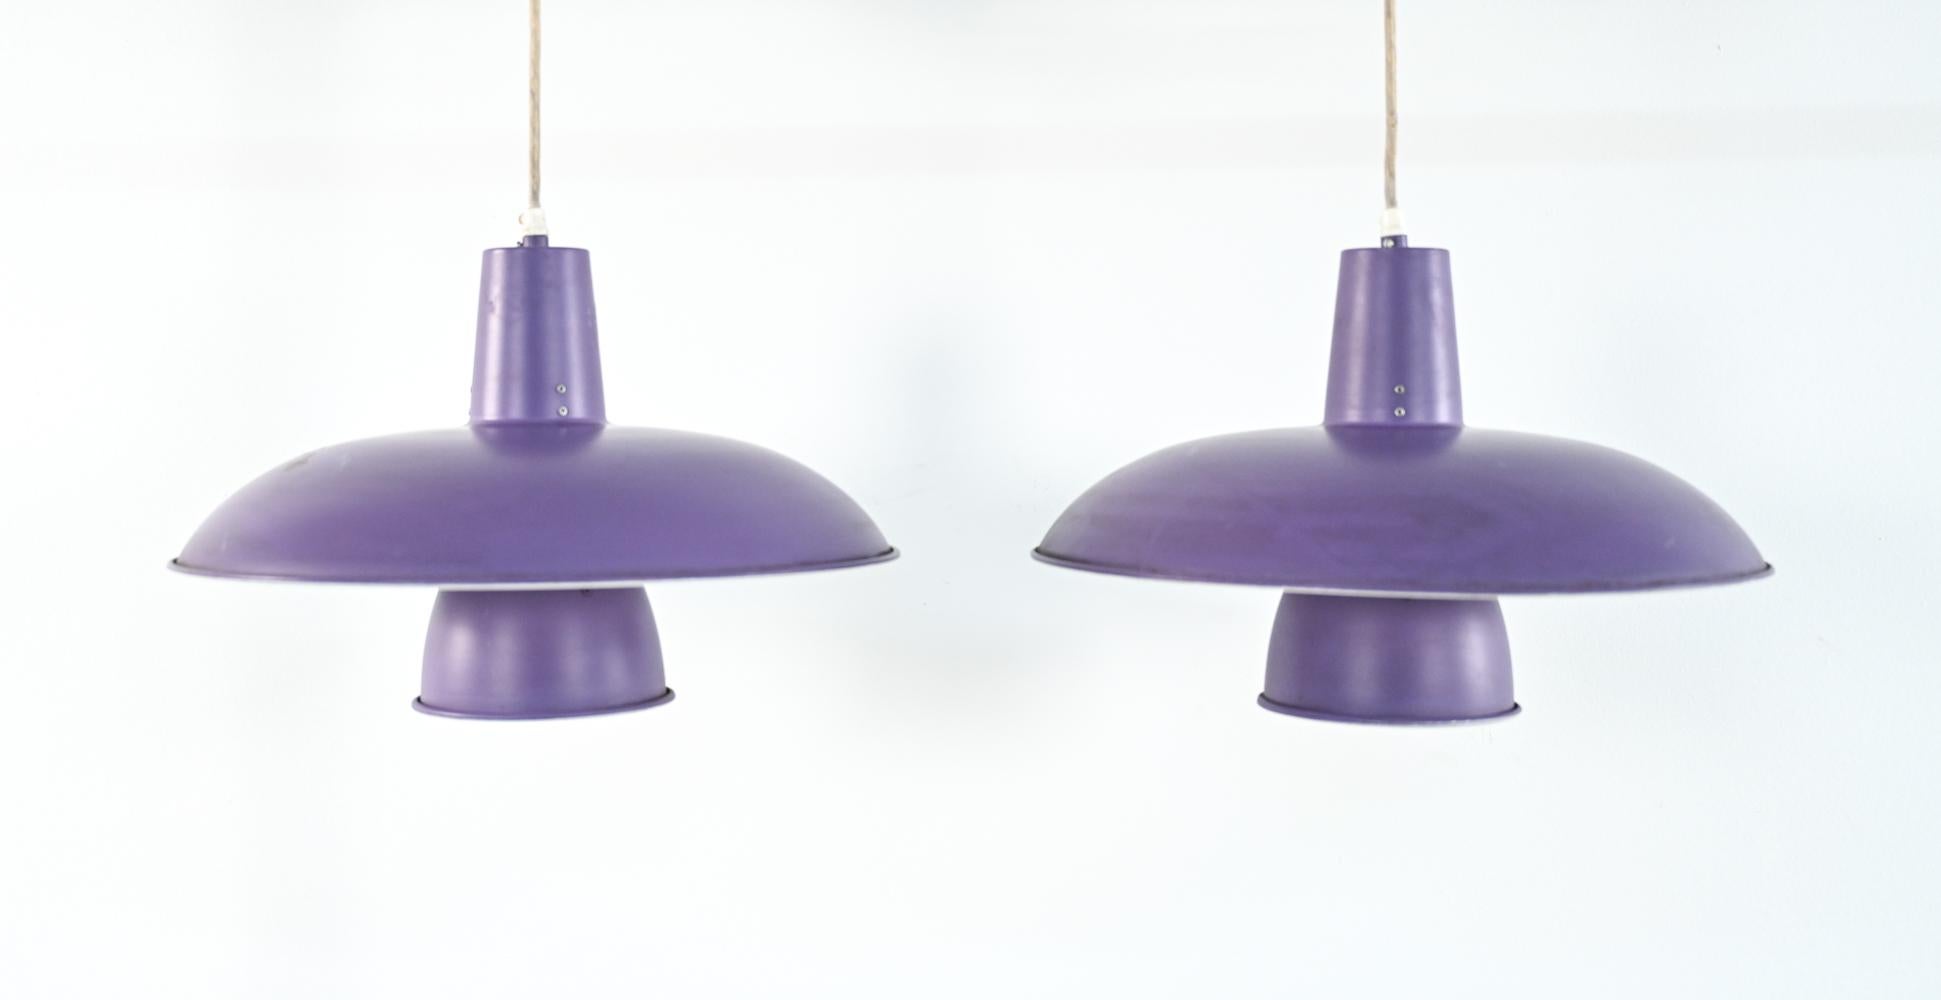 Two pairs are available - this is a rare opportunity to own four matching pendants! 
Little information is available on the rare PH Badminton pendant light by Poul Henningsen. The lamp was reportedly designed in the 1930's for use in Danish